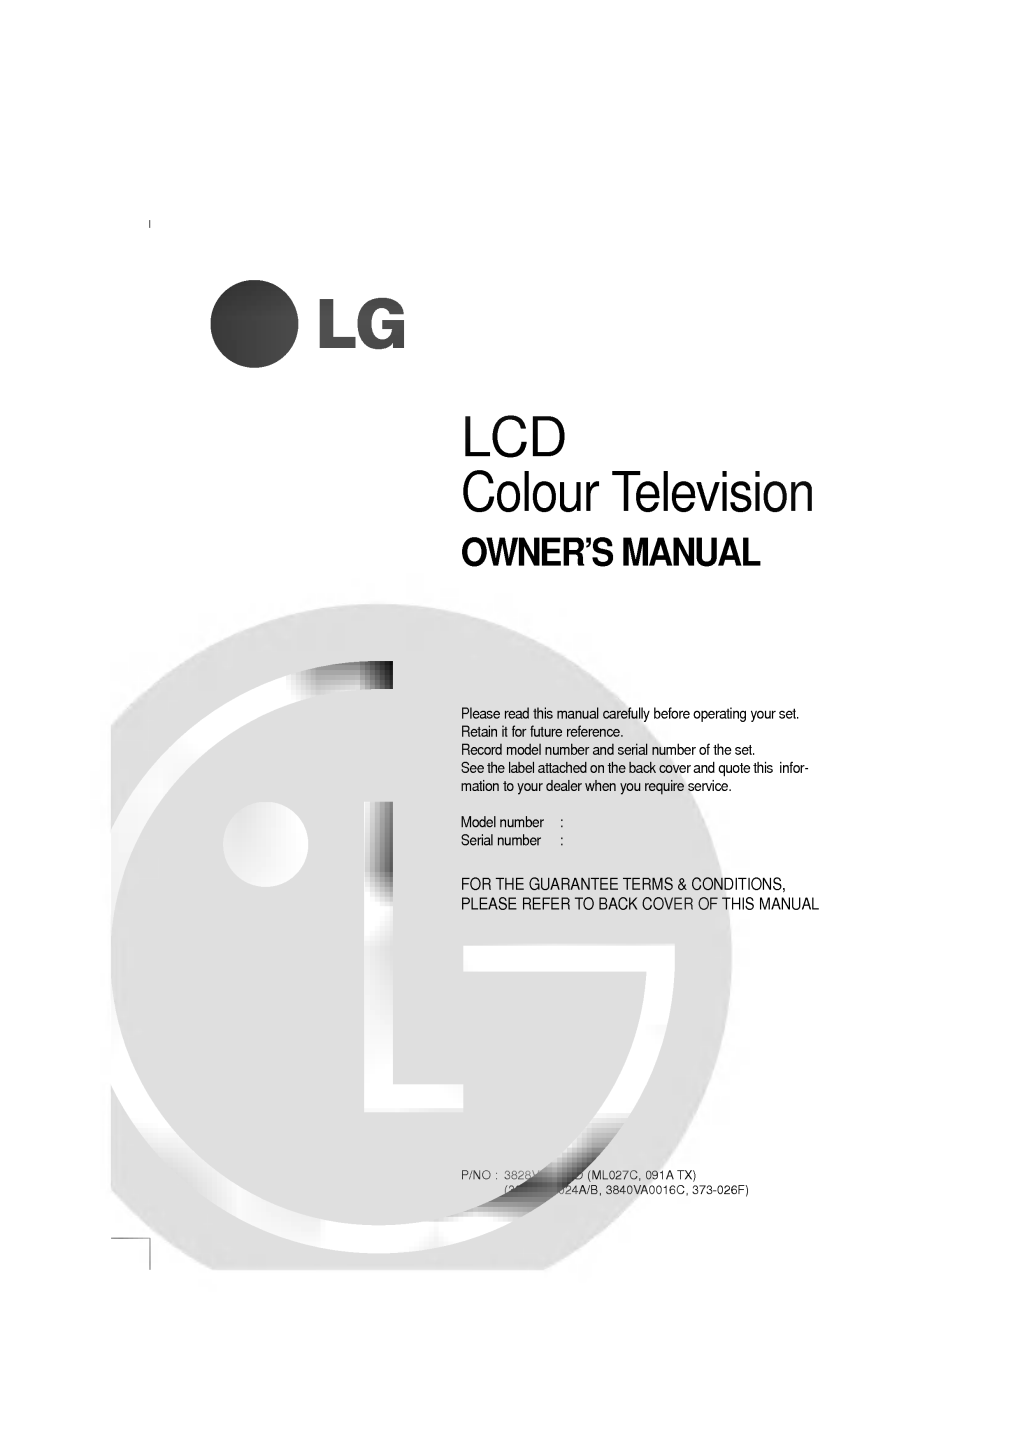 LCD Colour Television OWNER's MANUAL